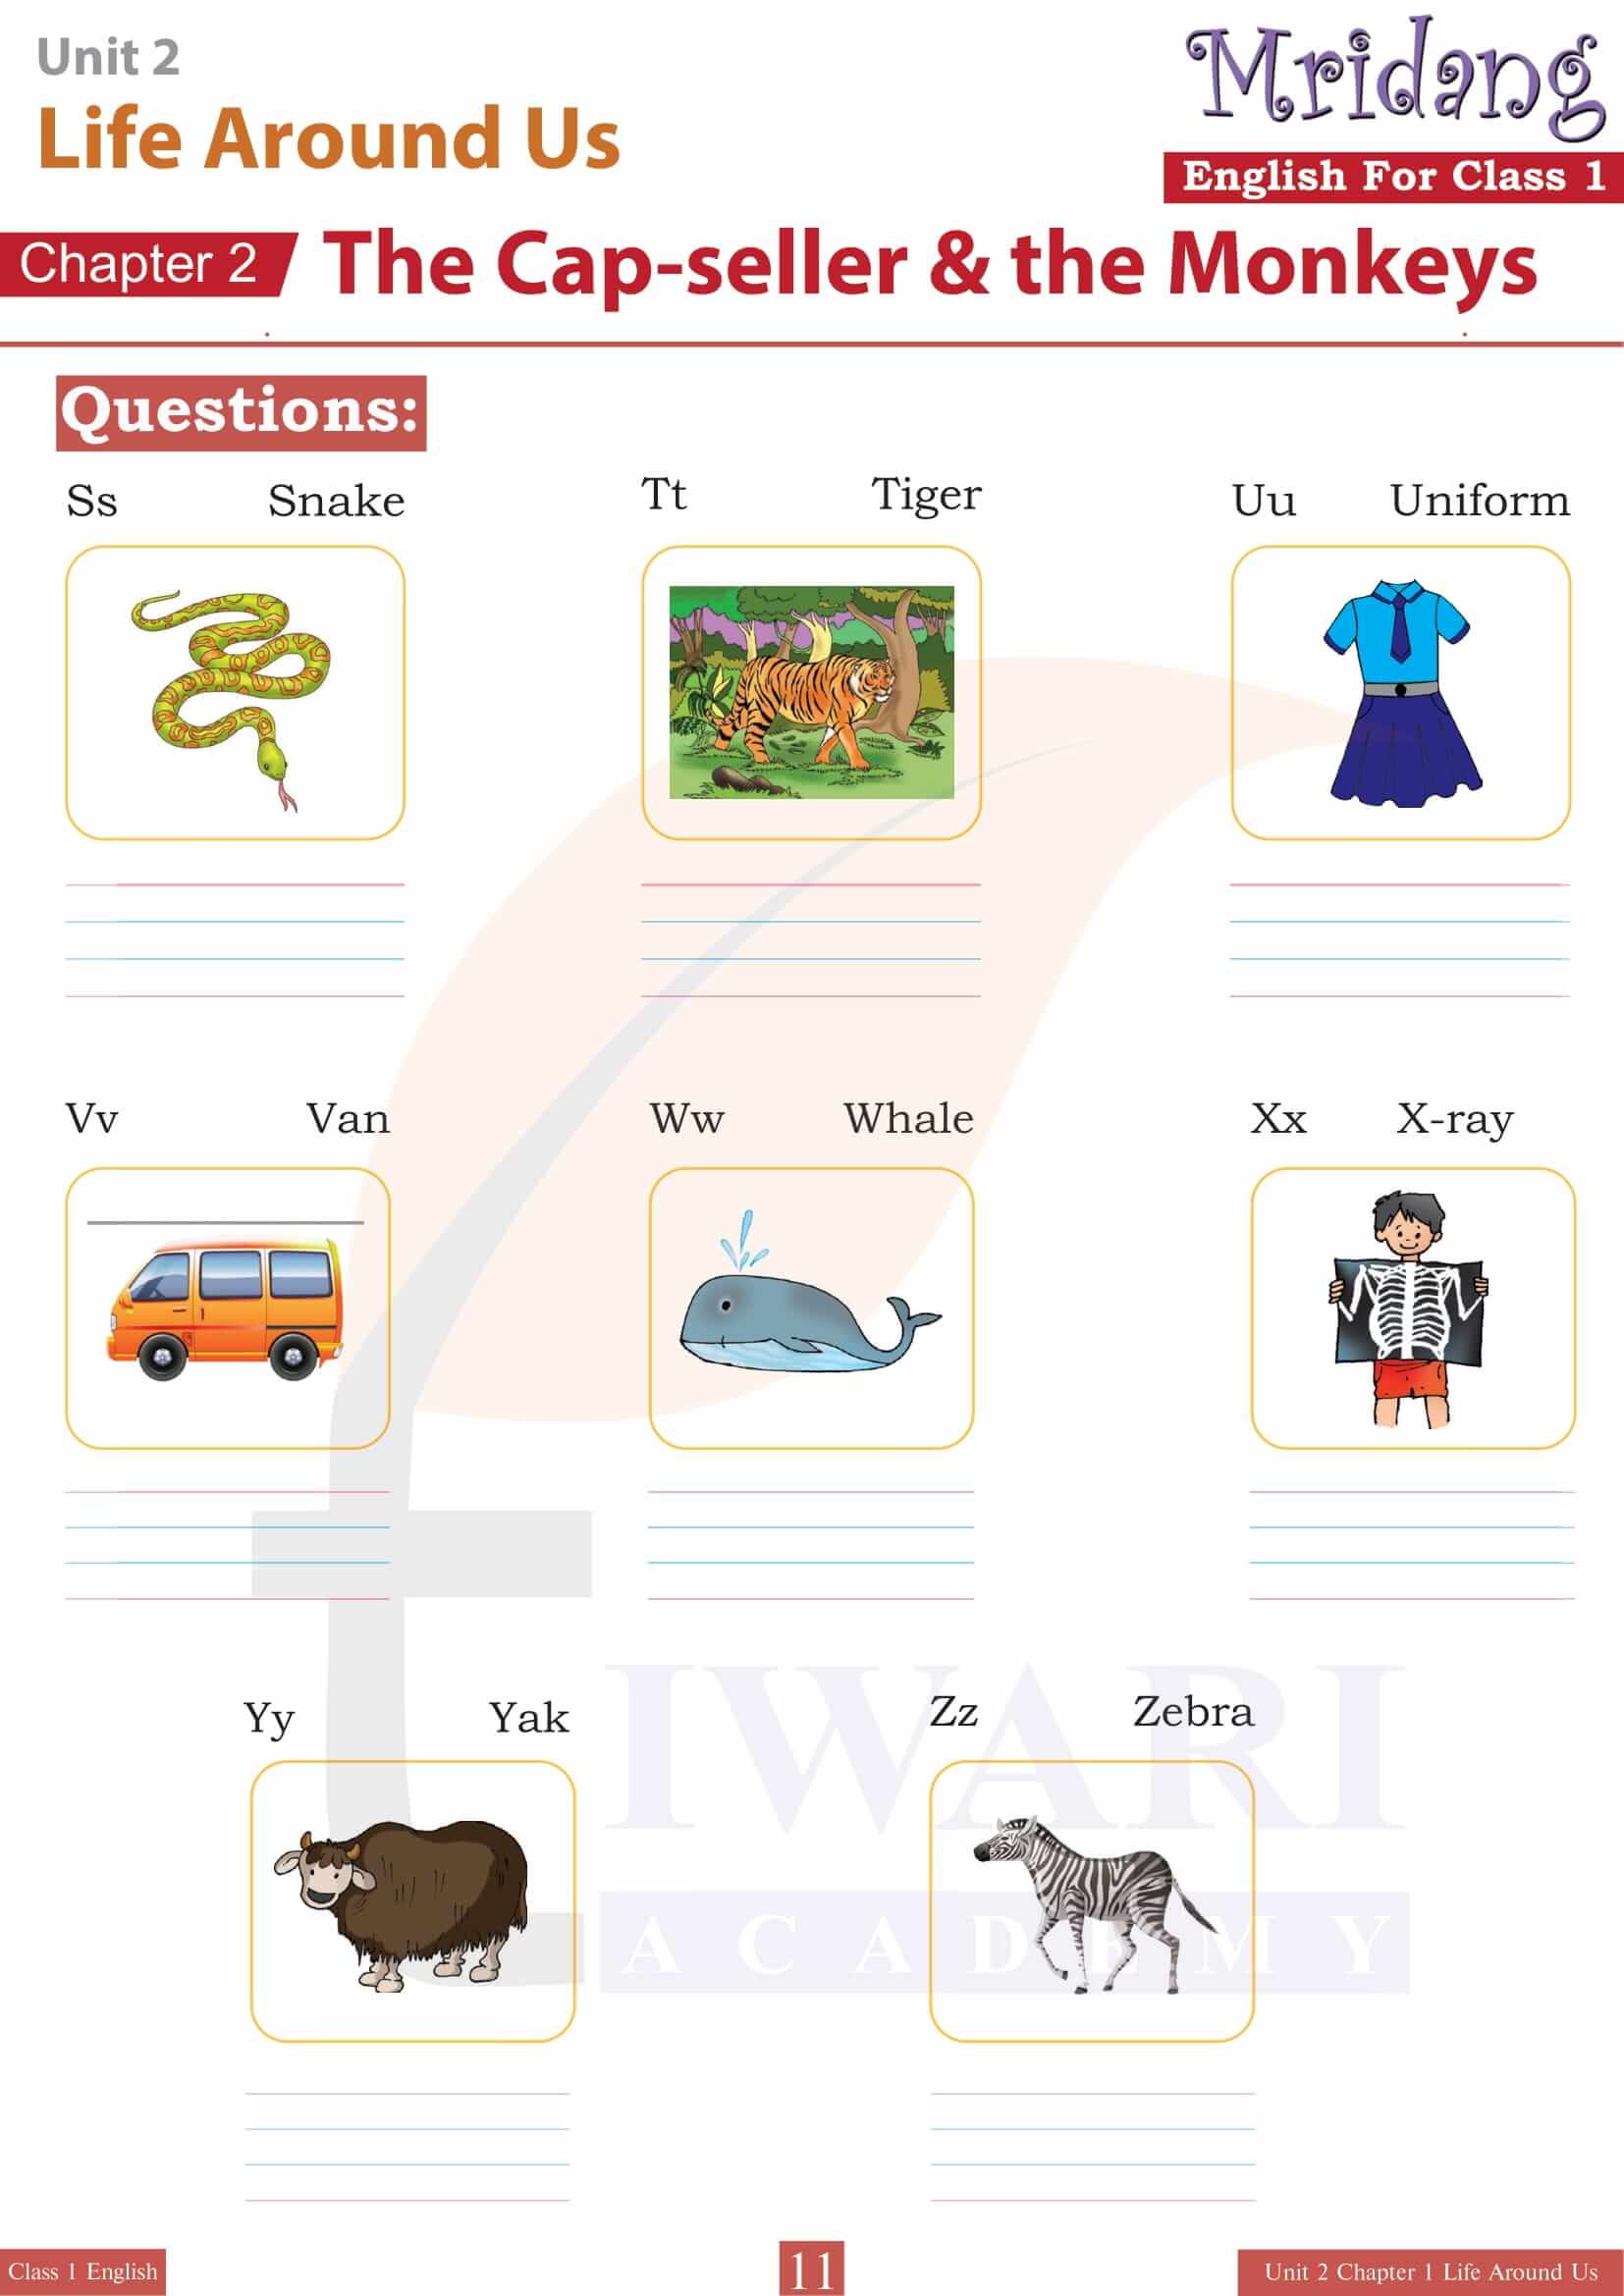 Class 1 English Mridang Chapter 2 The Cap-seller and the Monkeys of Unit 2 Life Around Us Question Answers